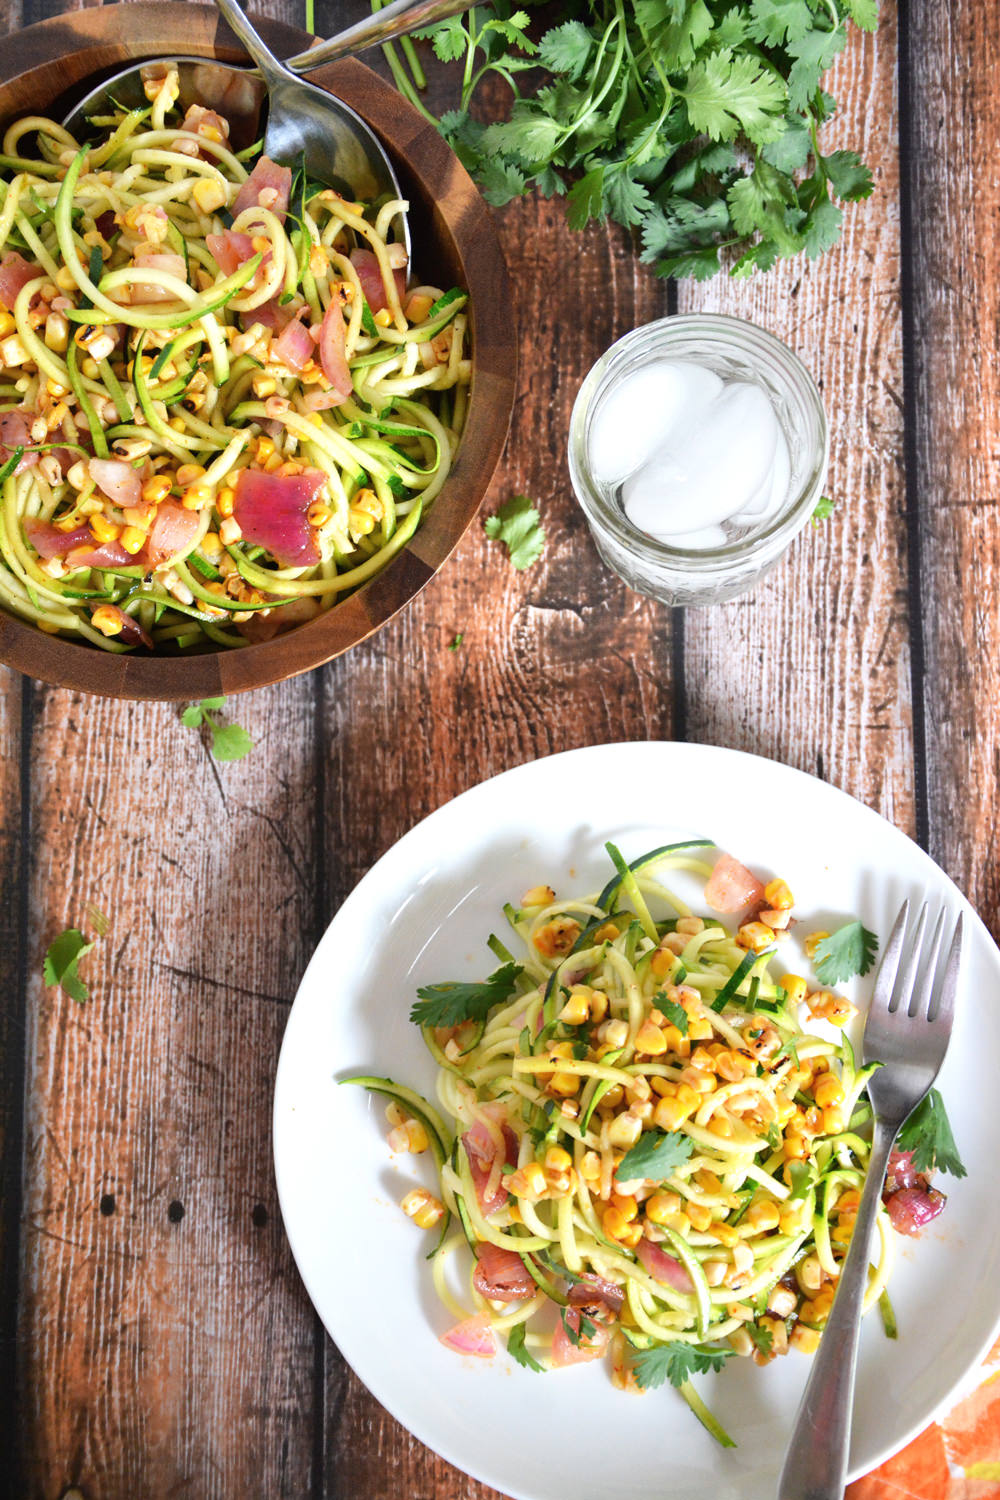 Roasted corn is paired with spiraled zucchini, red onion & tossed with a simple chili lime vinaigrette for a fresh, make ahead, summer roasted corn salad!